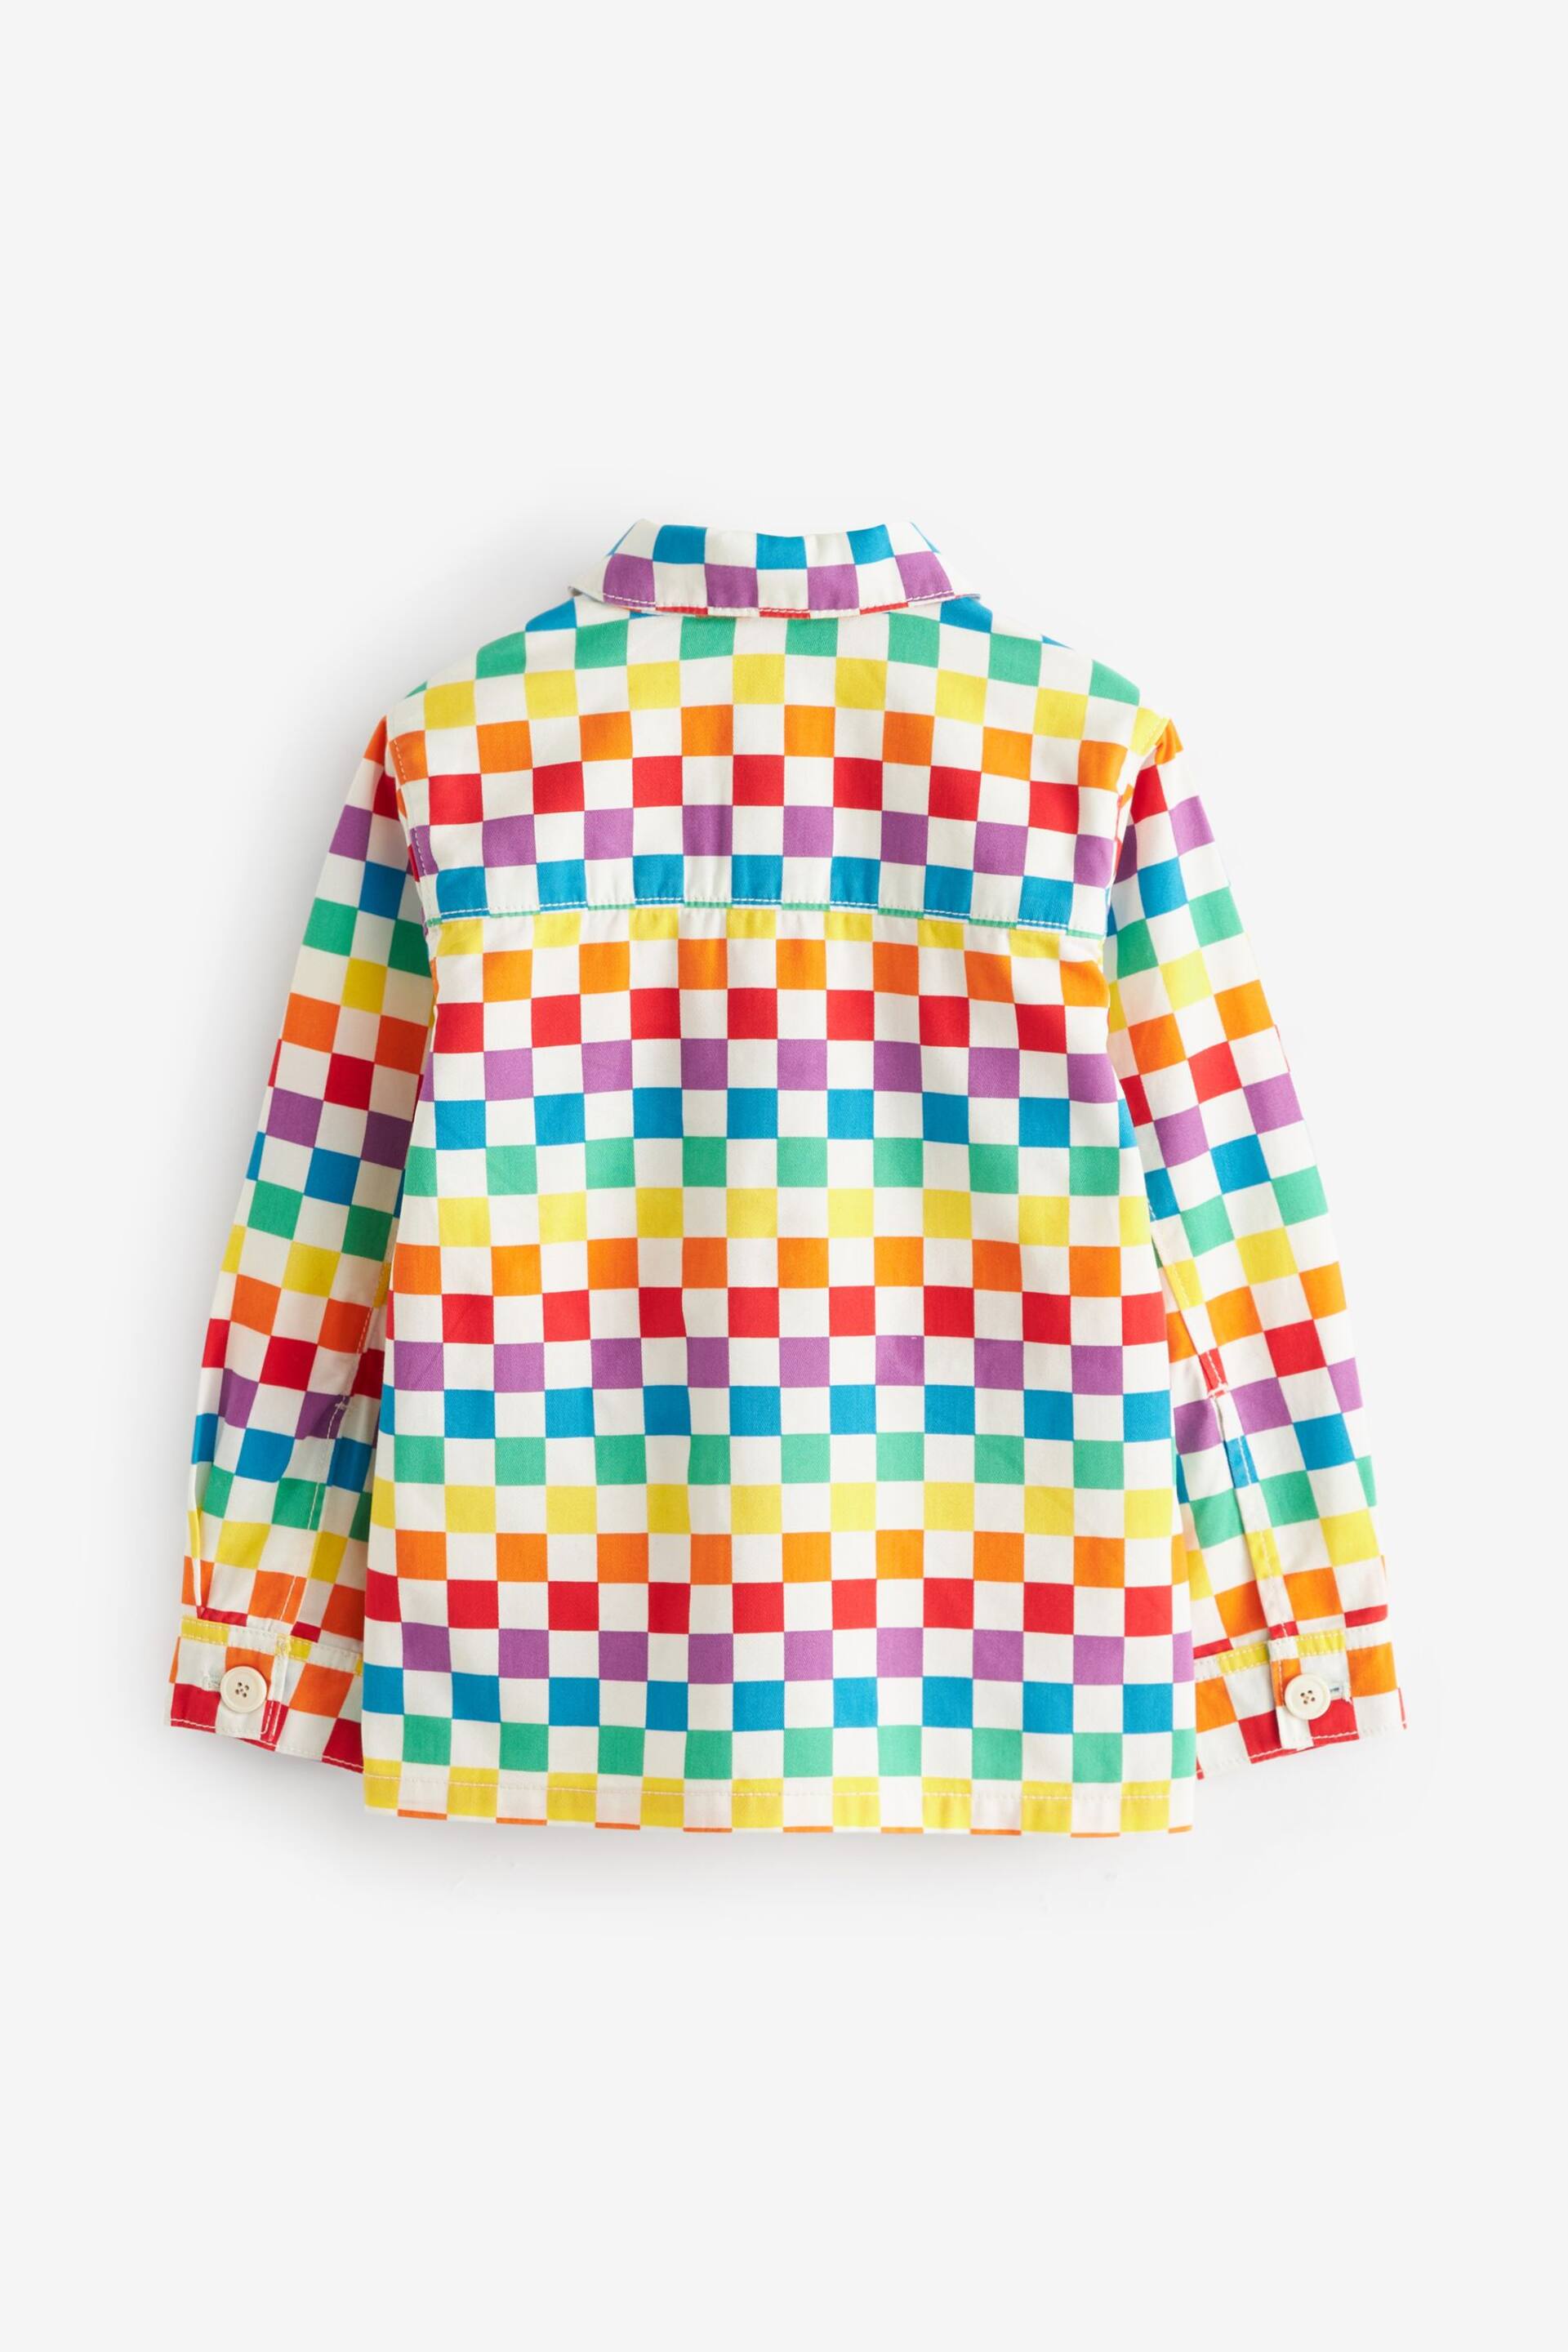 Little Bird by Jools Oliver Multi Rainbow Checkerboard Shacket - Image 8 of 9